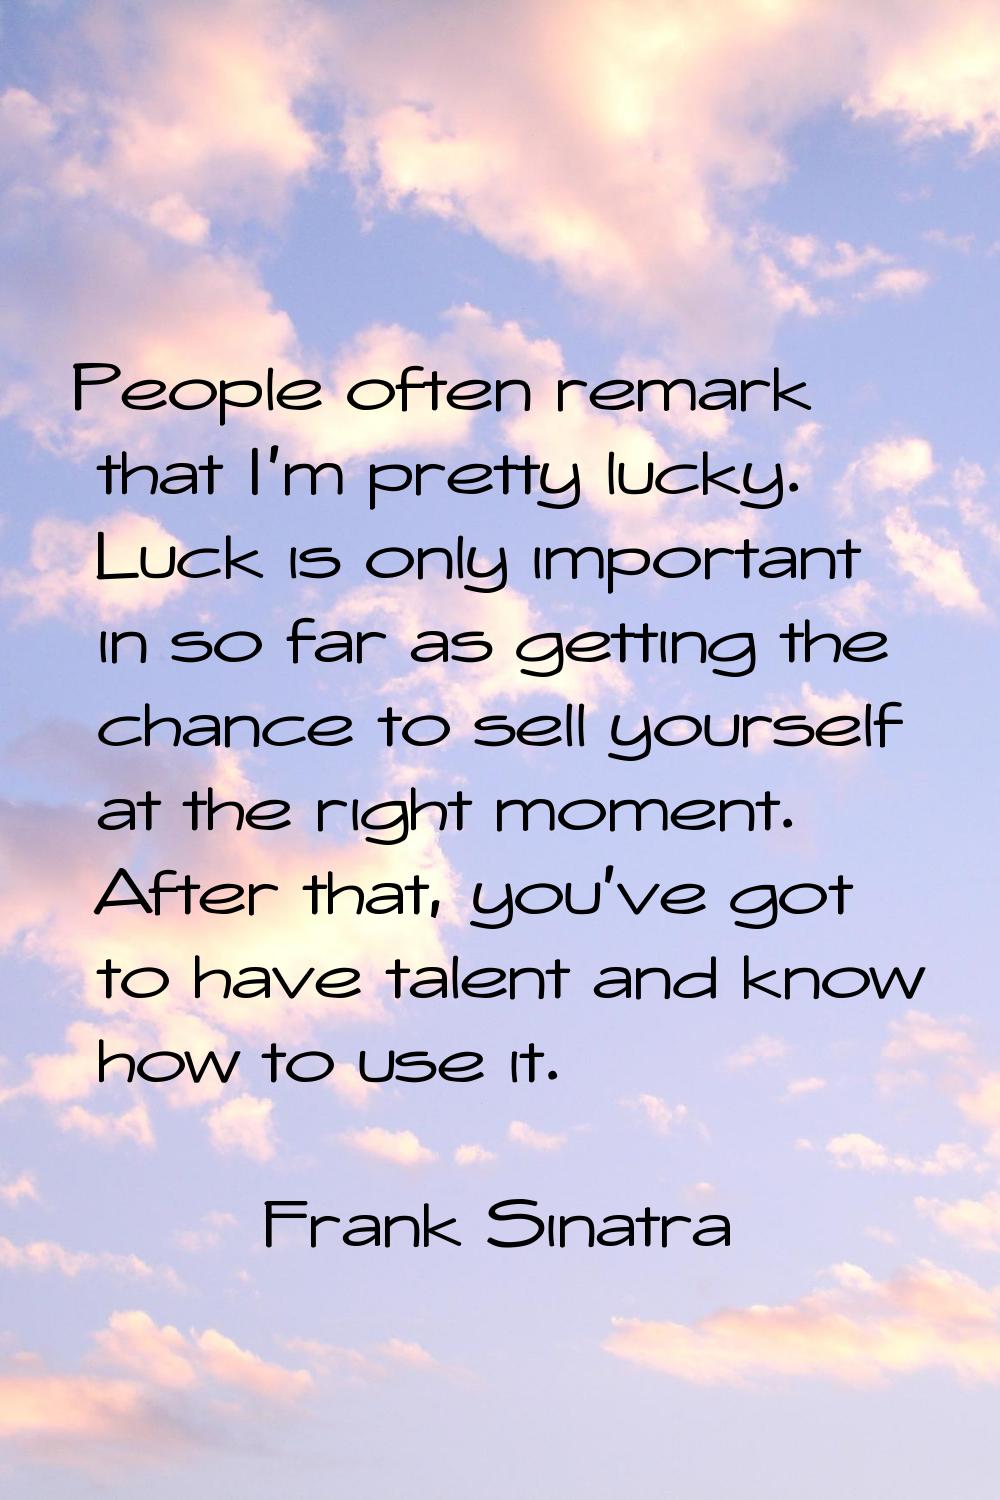 People often remark that I'm pretty lucky. Luck is only important in so far as getting the chance t